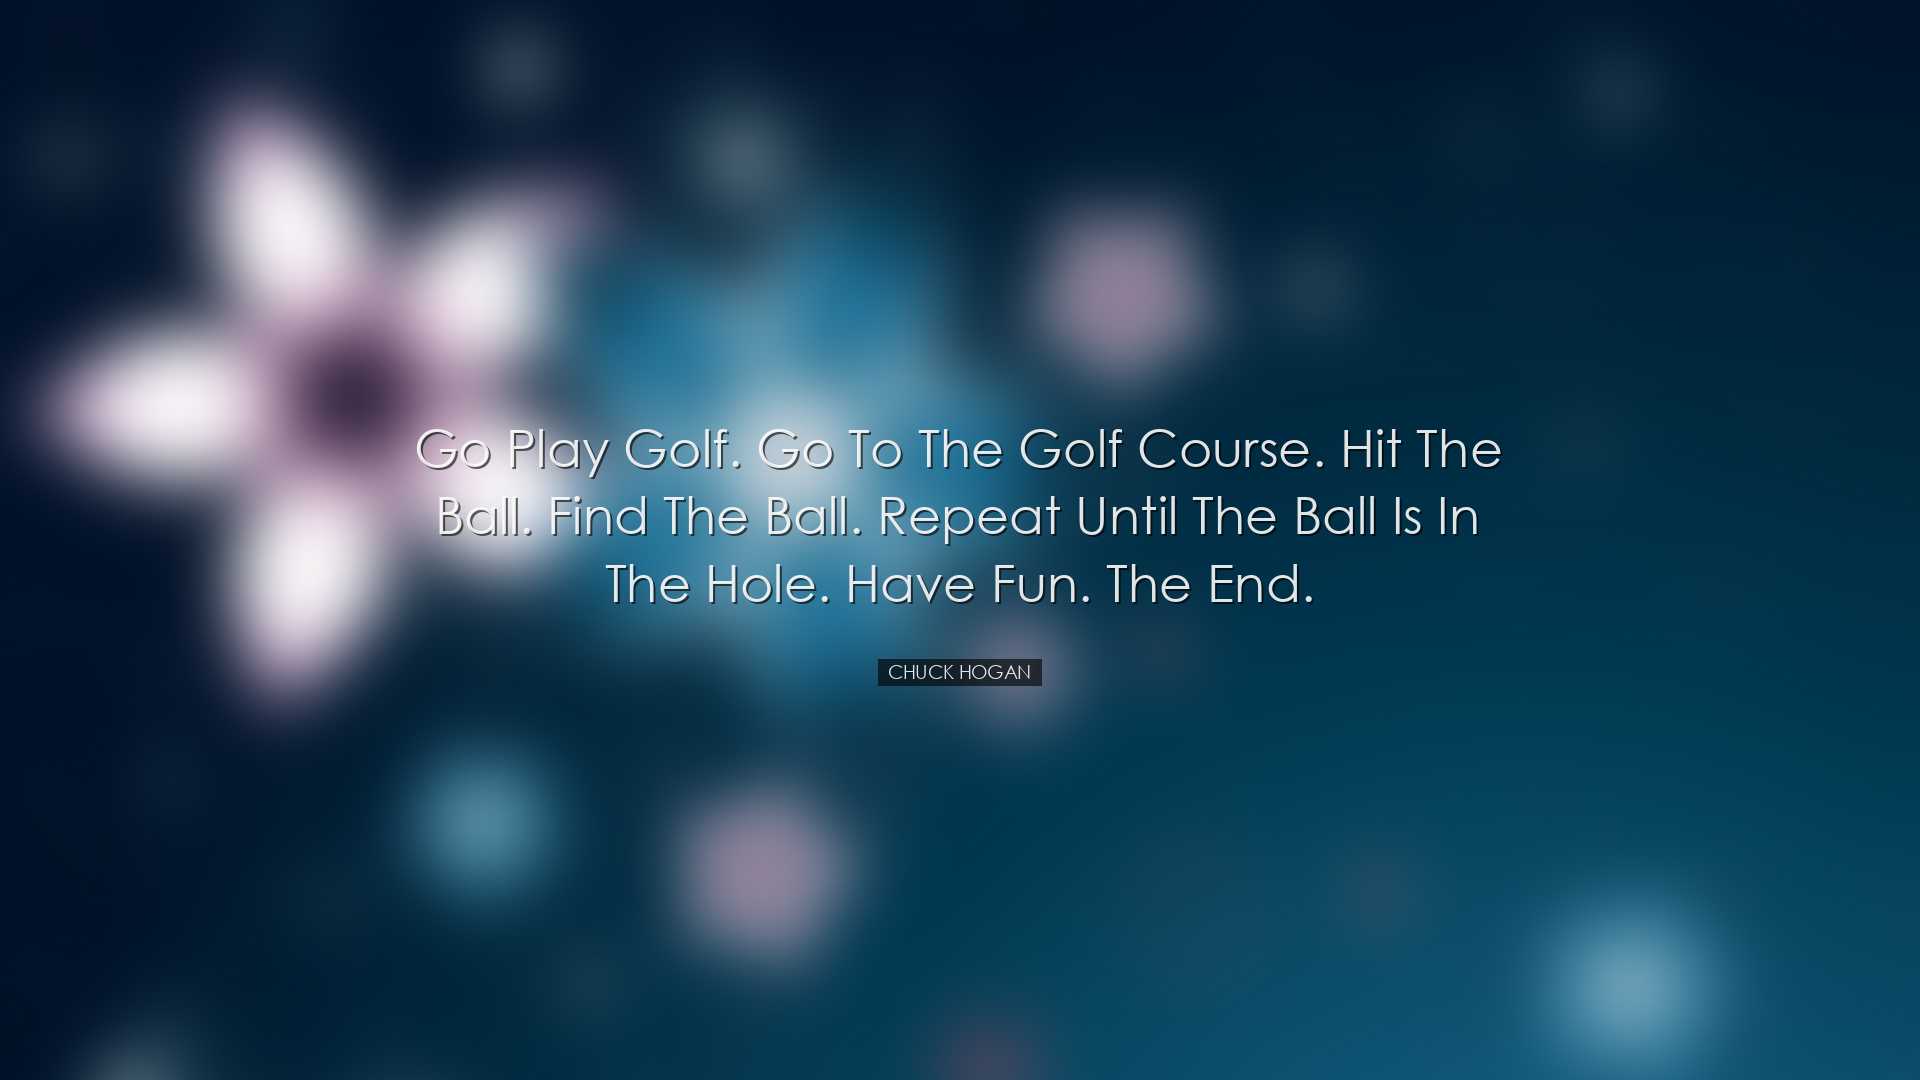 Go play golf. Go to the golf course. Hit the ball. Find the ball.